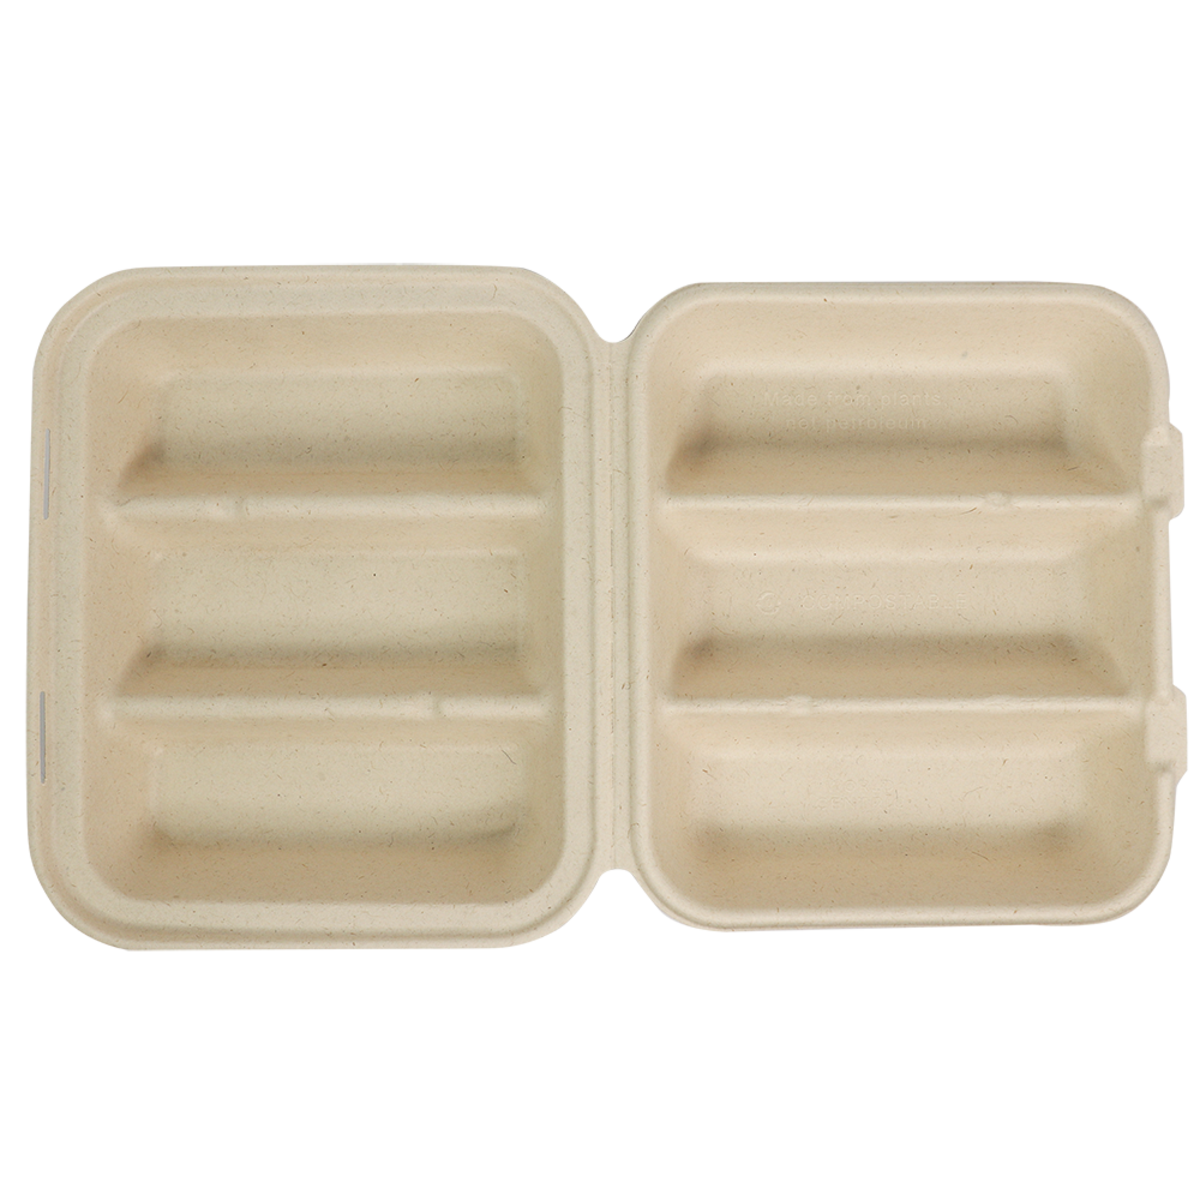 9"x 8"x 3" Taco Box Clamshell 3 Compartment | Natural Plant Fiber (Pack of 100)